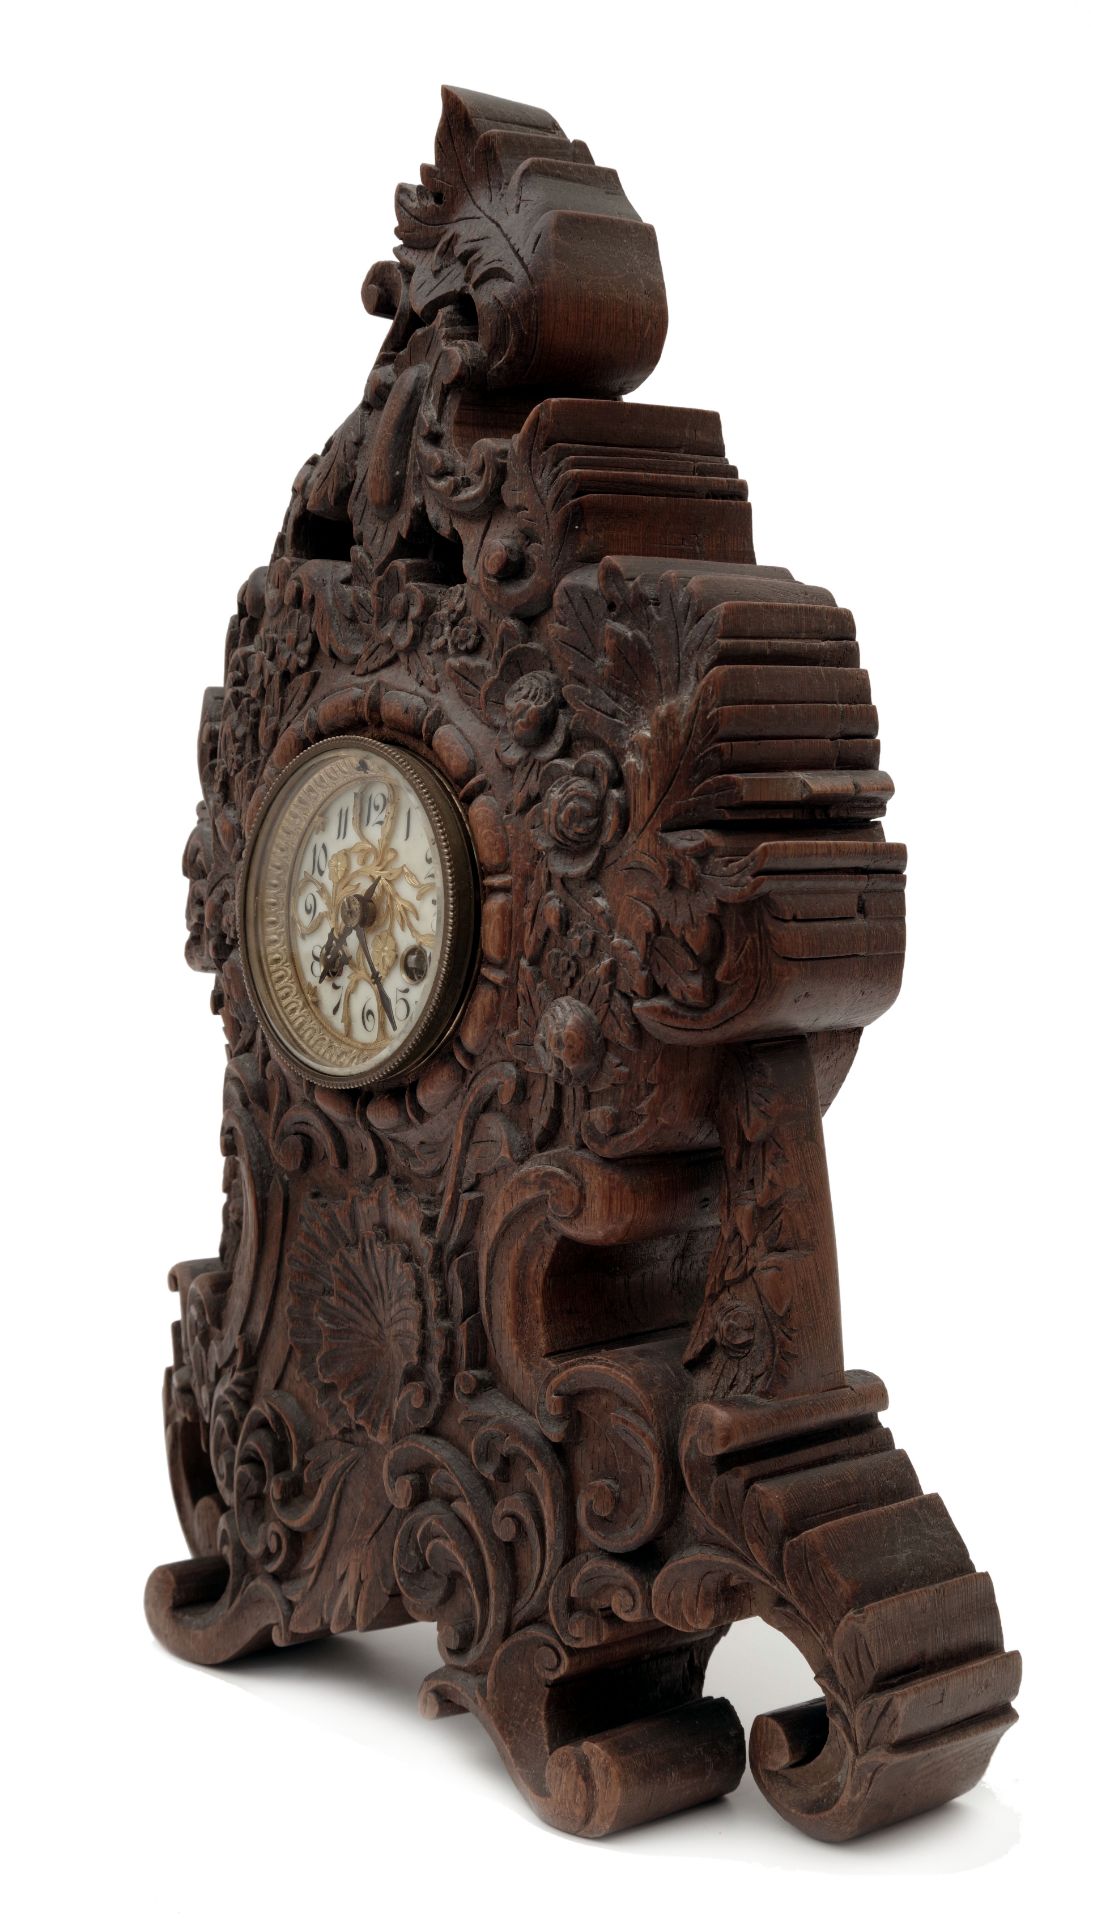 A French Rococo Style Mantel Clock - Image 2 of 5